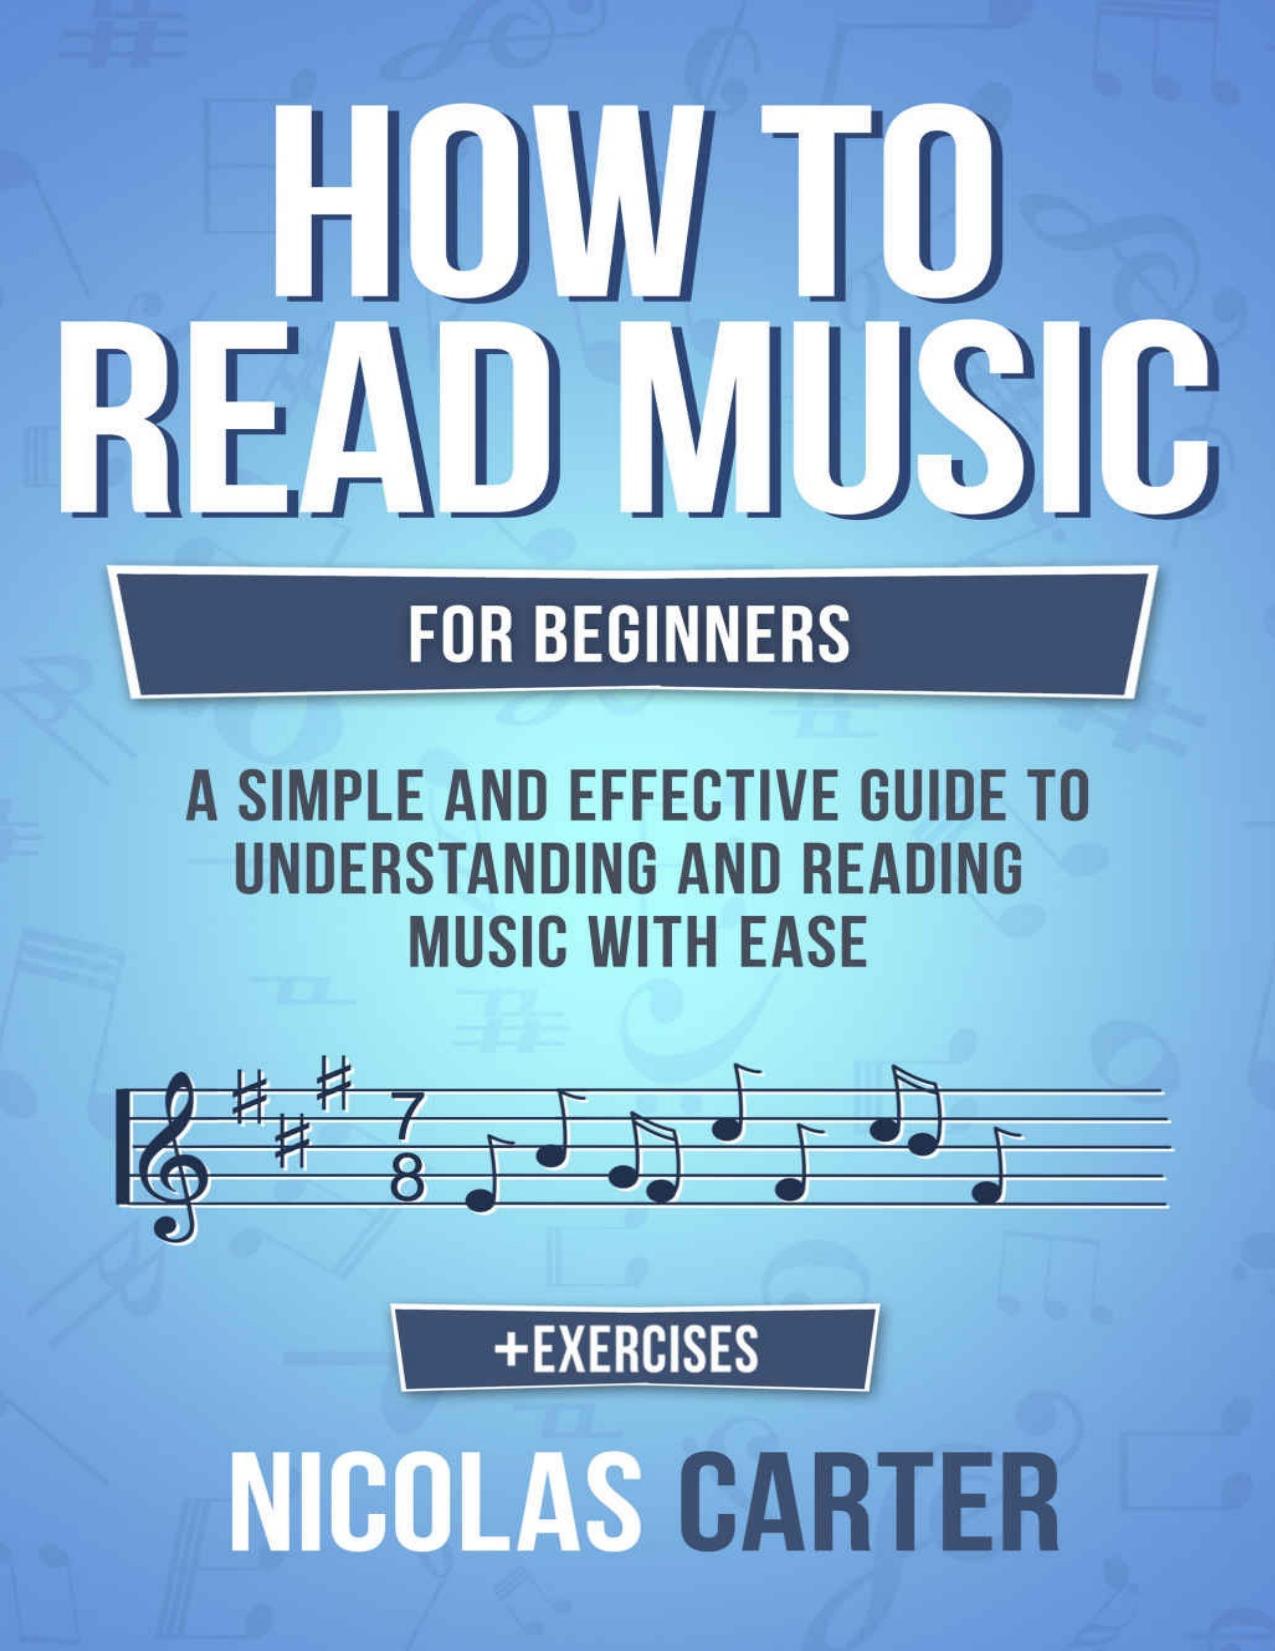 How To Read Music: For Beginners - A Simple and Effective Guide to Understanding and Reading Music with Ease - PDFDrive.com